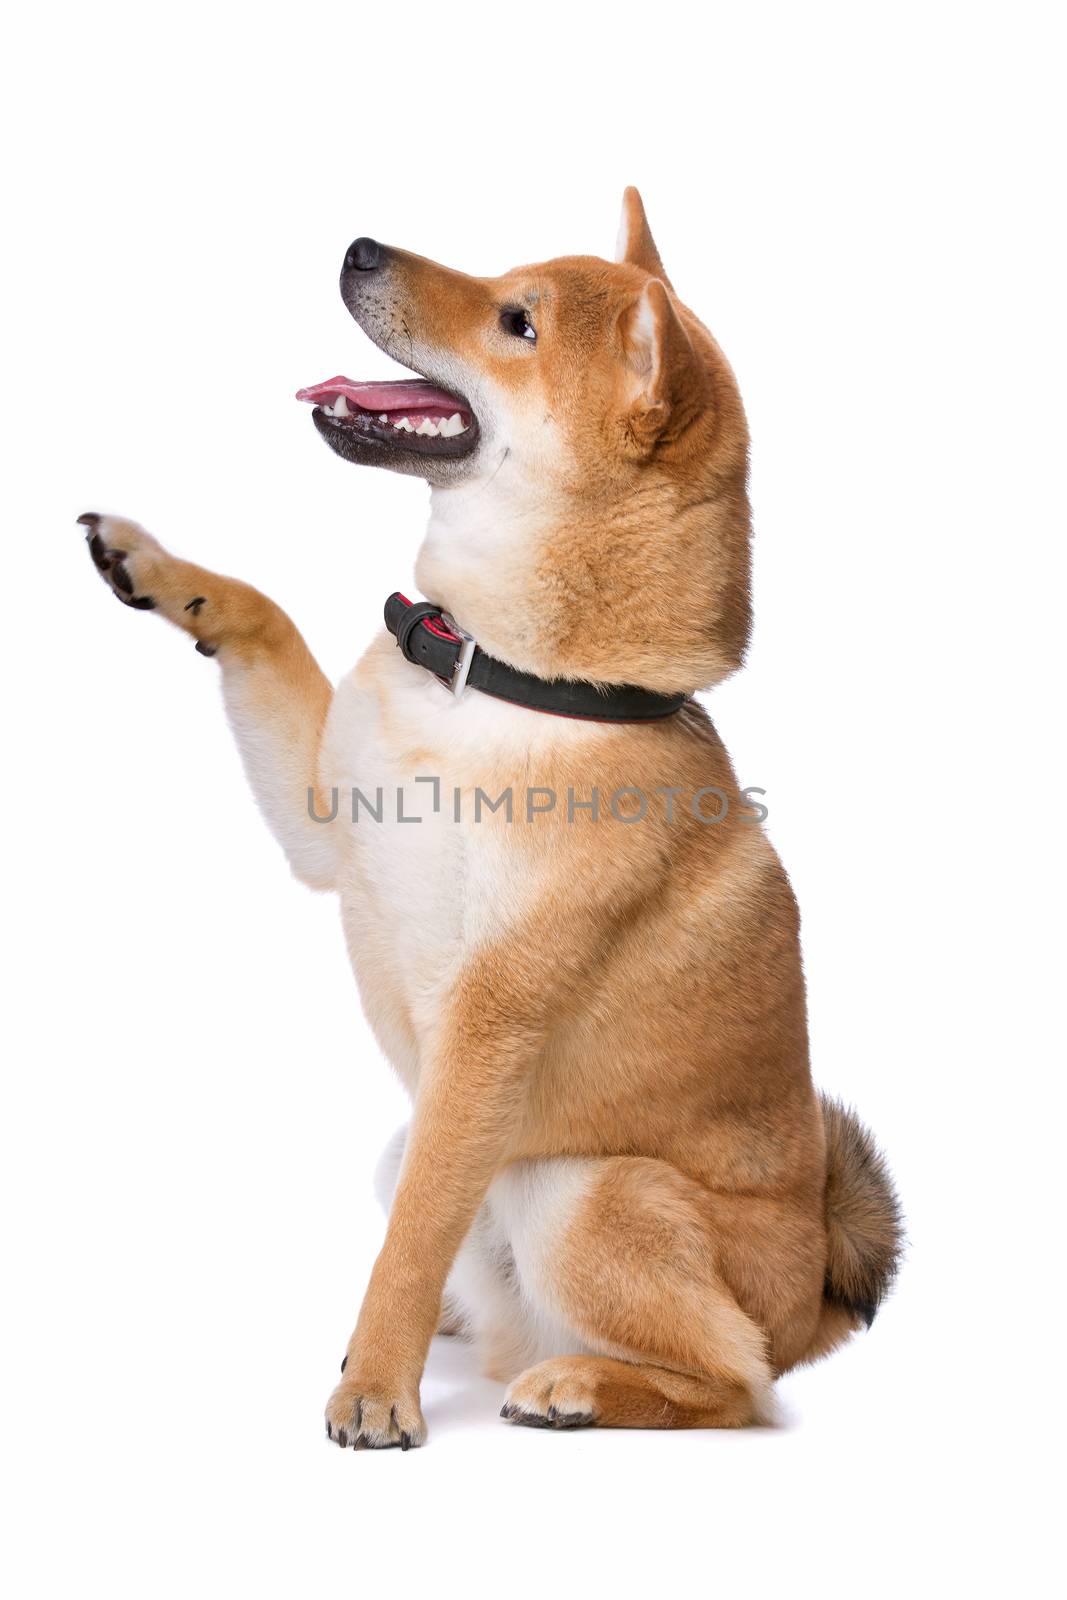 Shina Inu in front of a white background